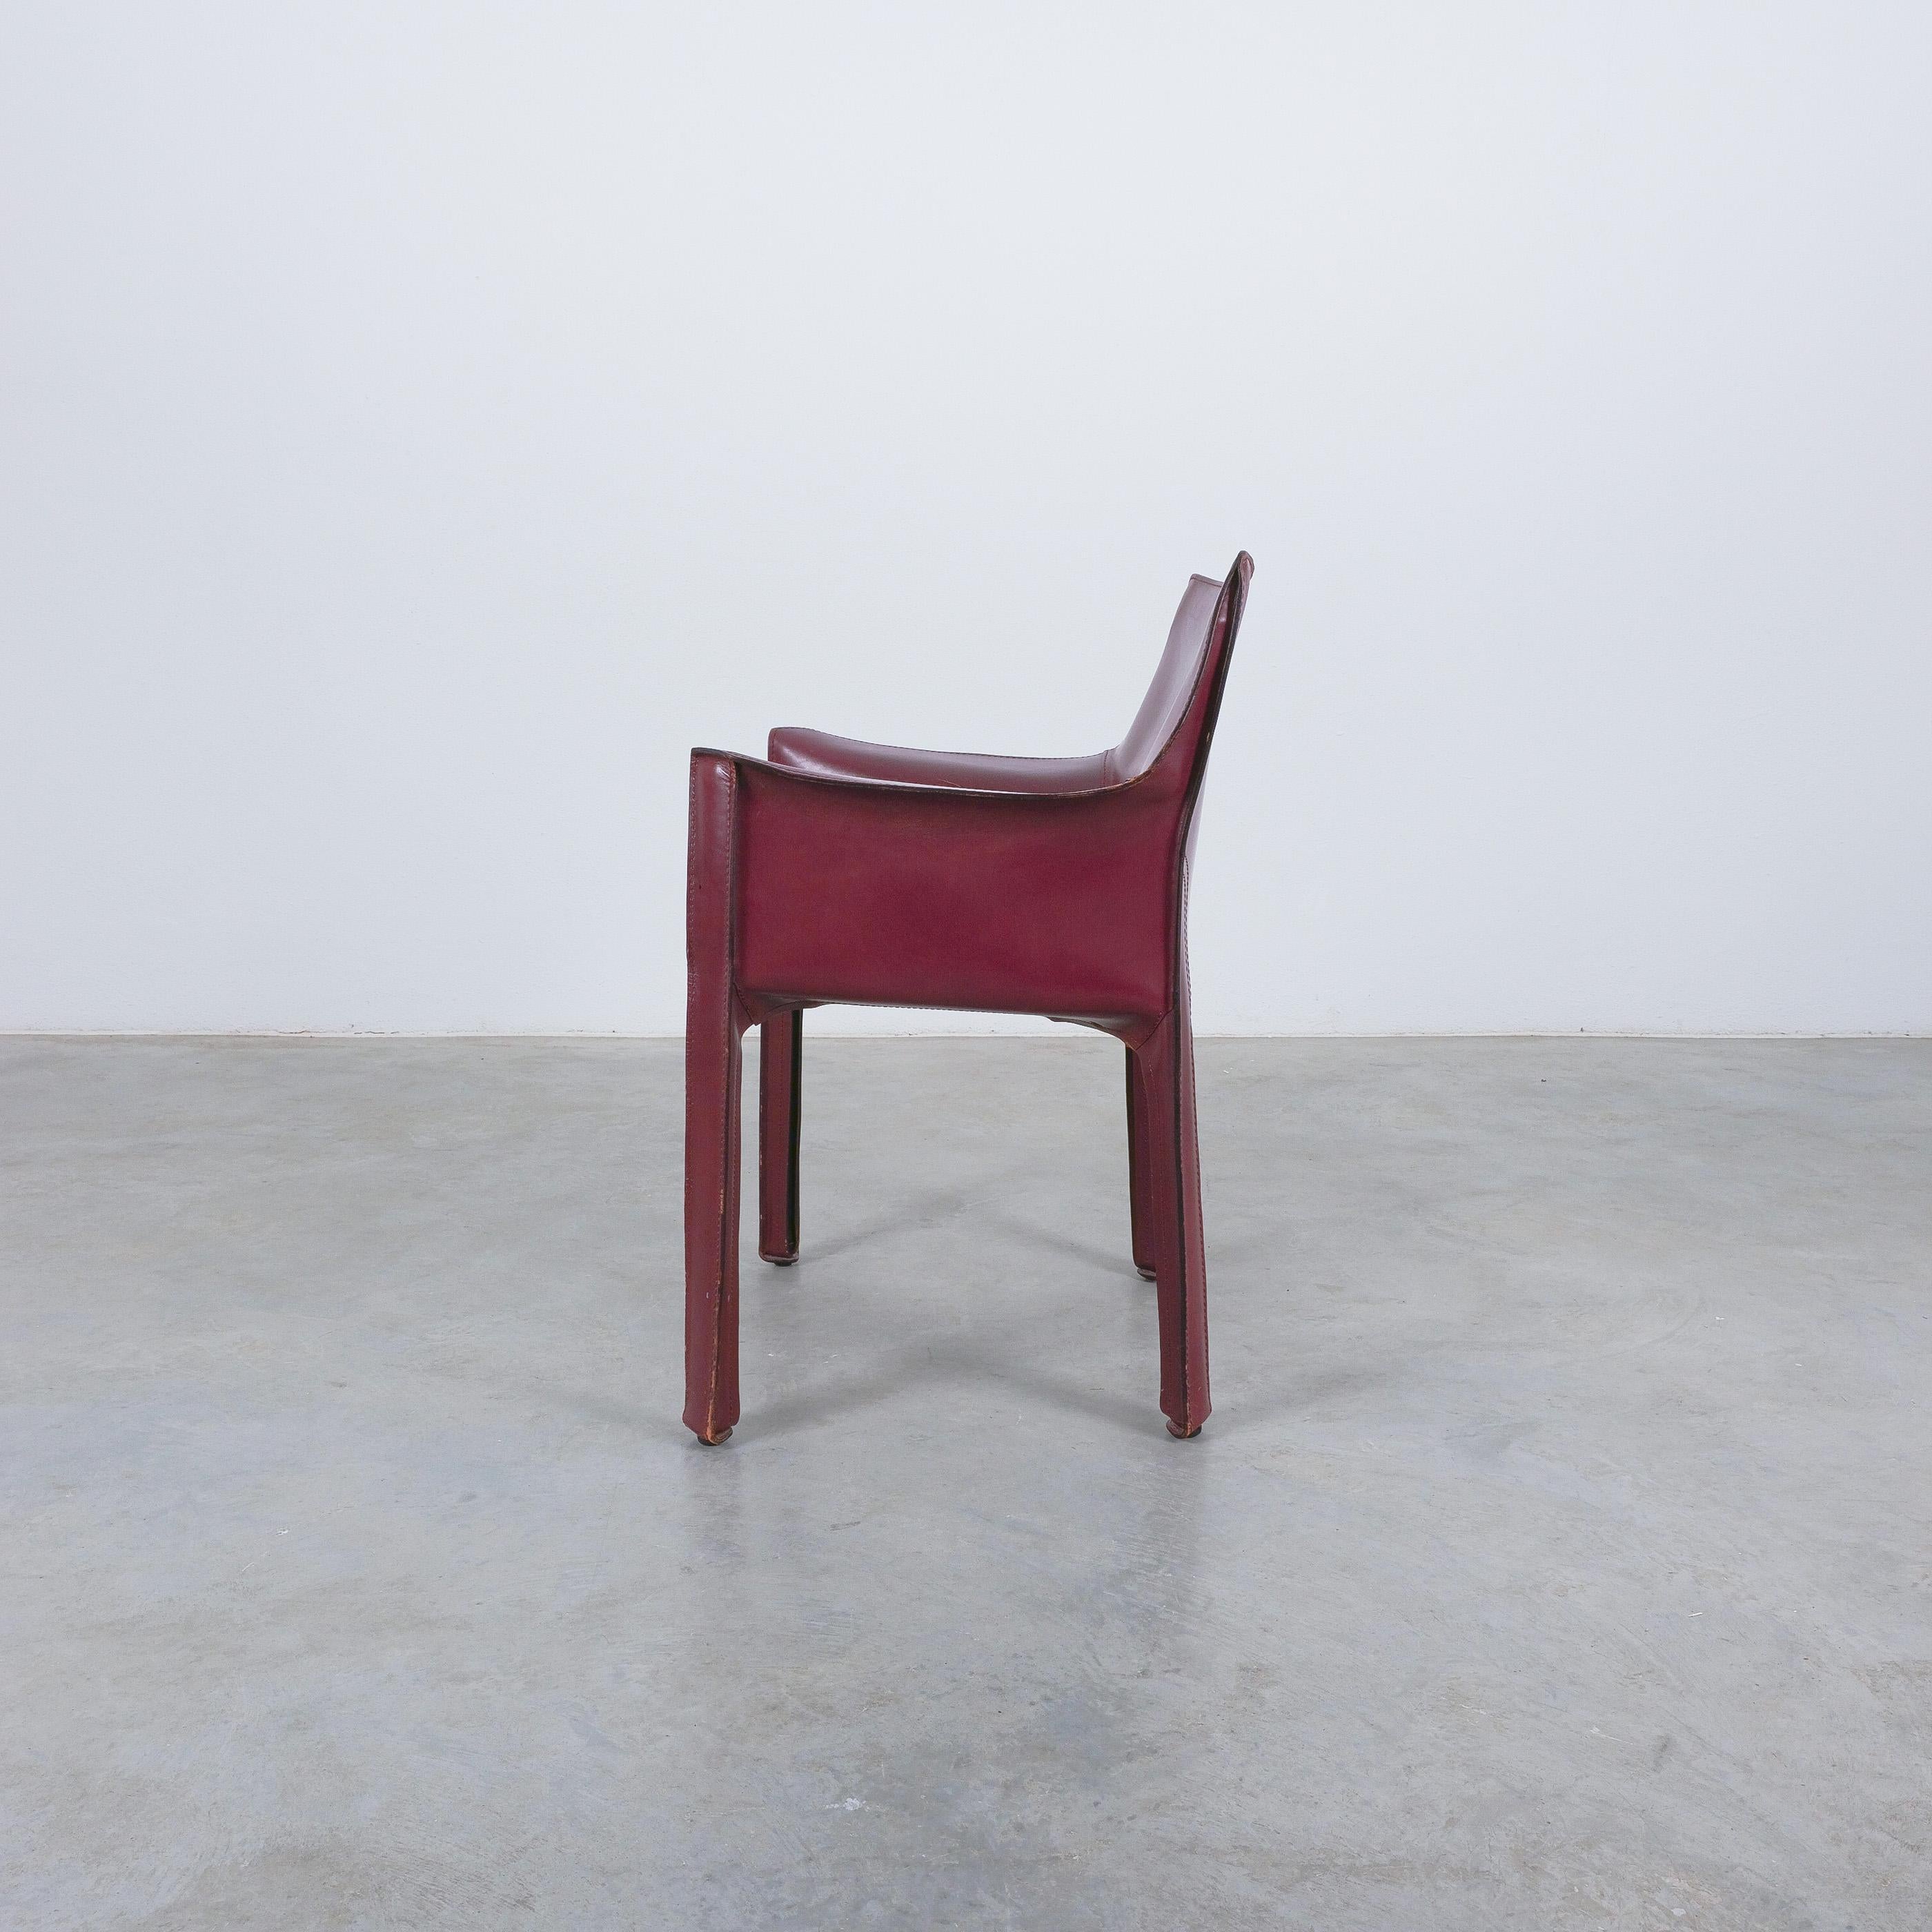 Italian Mario Bellini Cassina Cab 413 Burgundy Red Leather Dining Chairs, 1980 For Sale